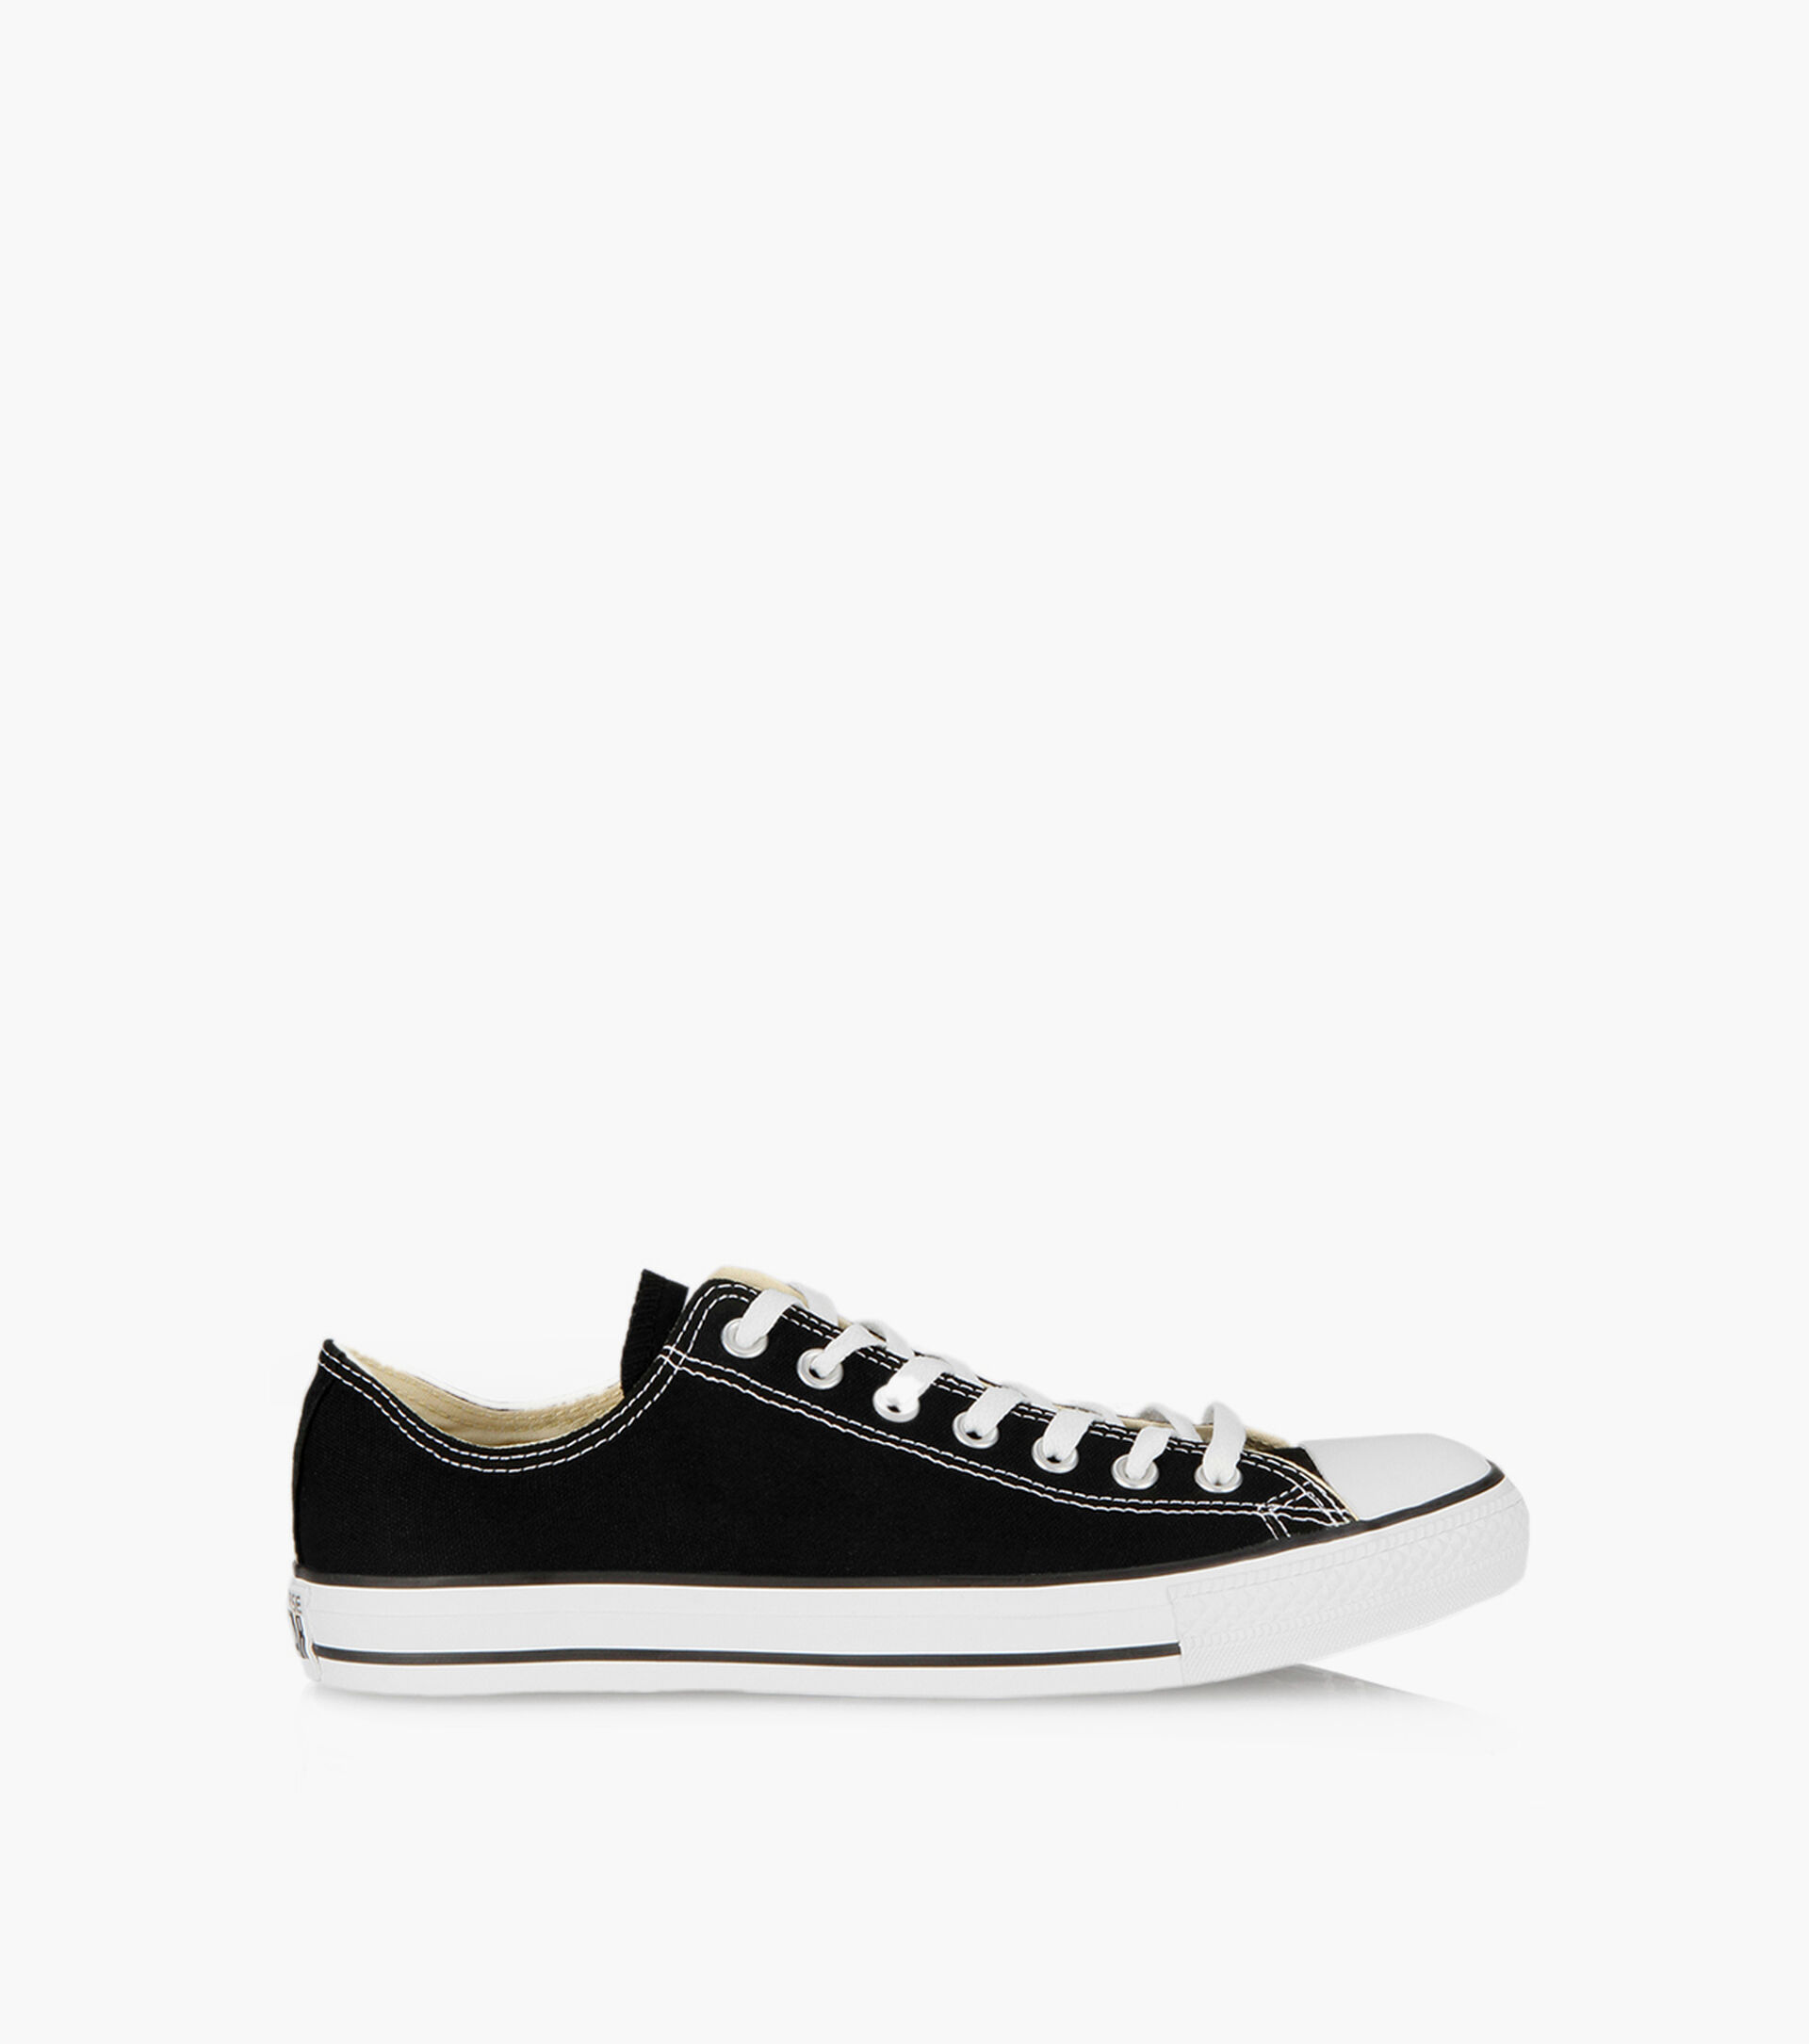 CONVERSE CHUCK TAYLOR ALL STAR LOW TOP | Browns Shoes